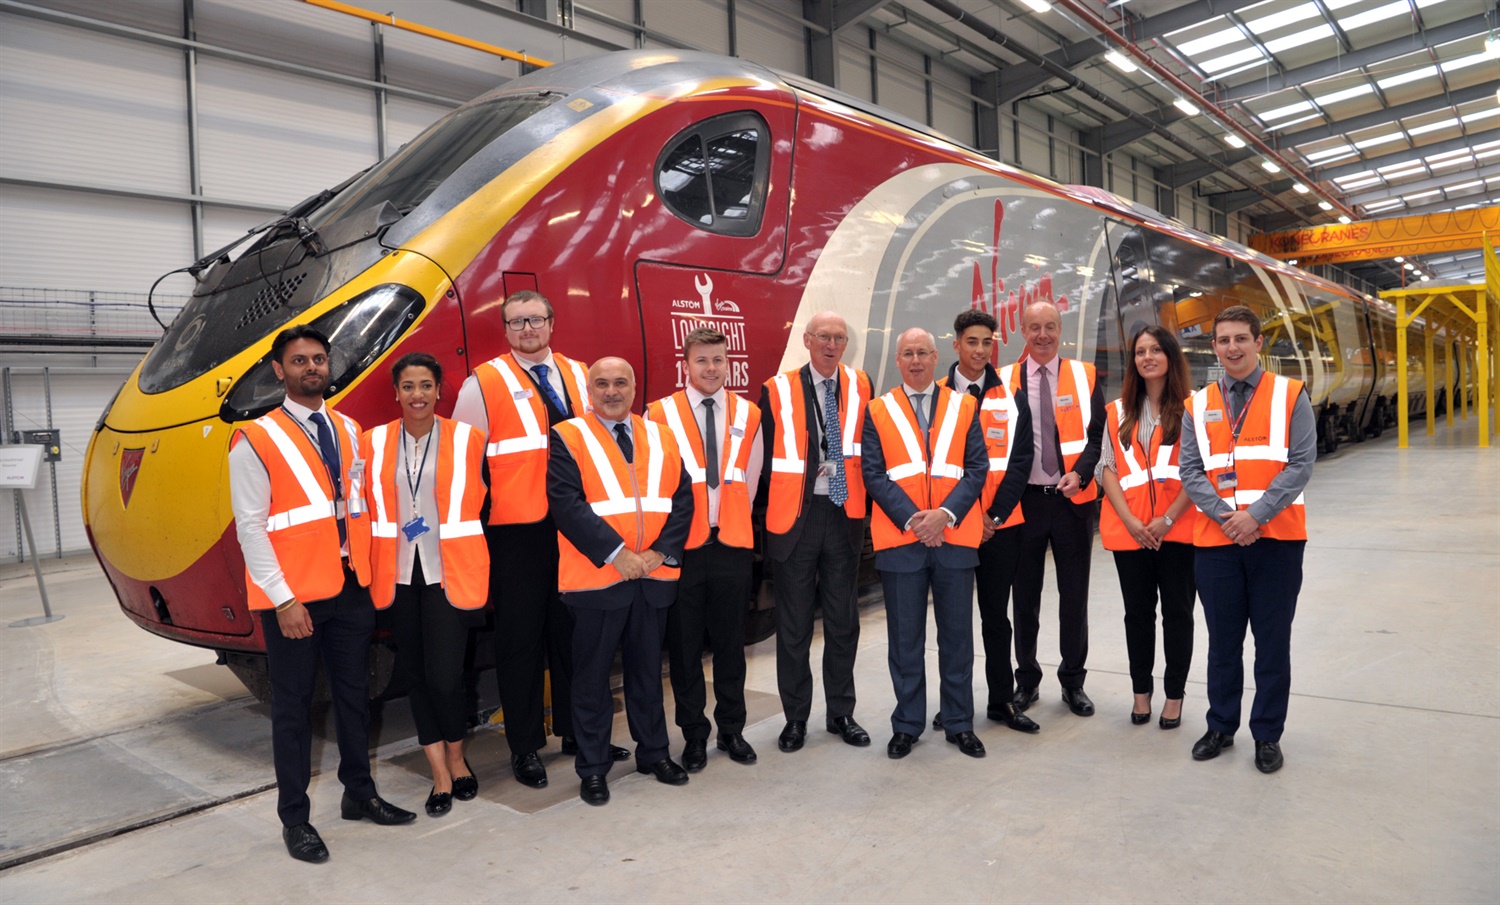 A rail centre fit for the future